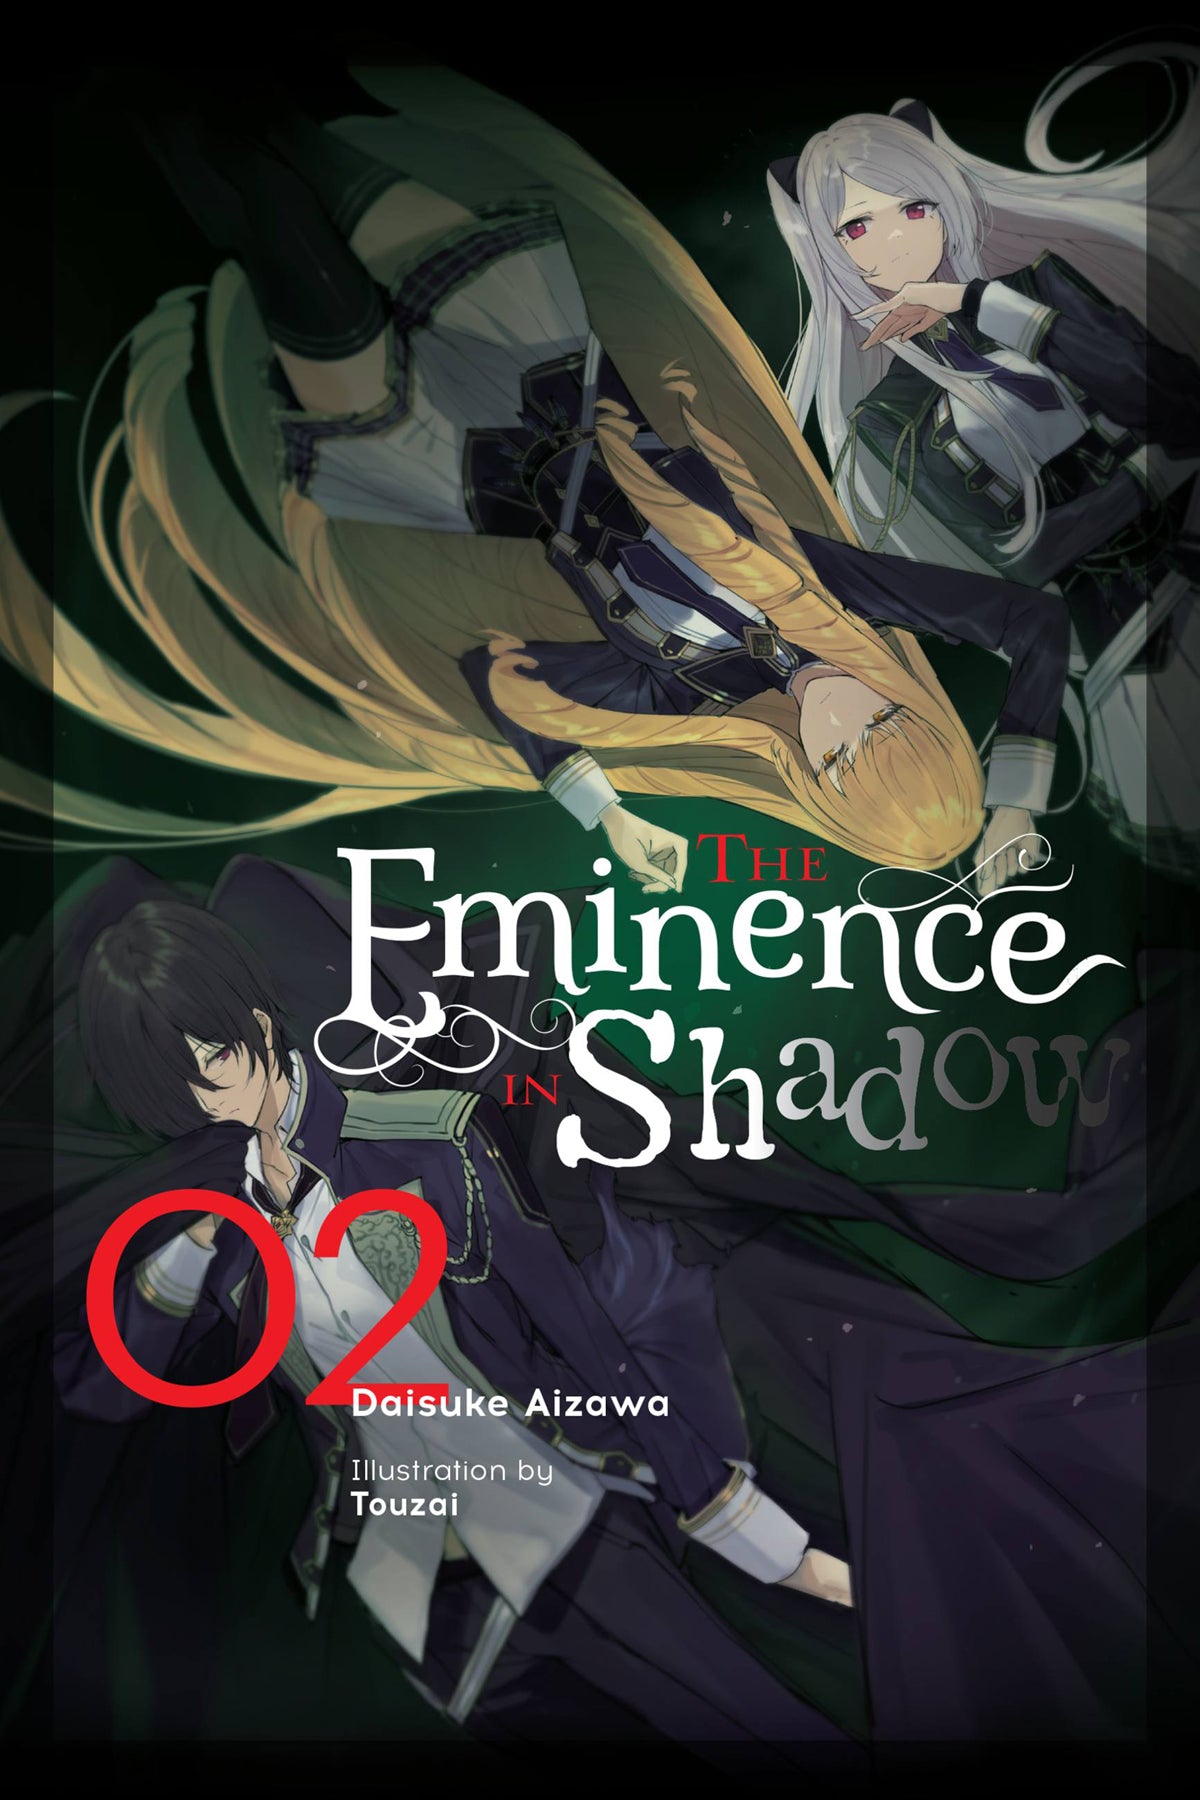 The Eminence in Shadow Vol. 02 (Light Novel)